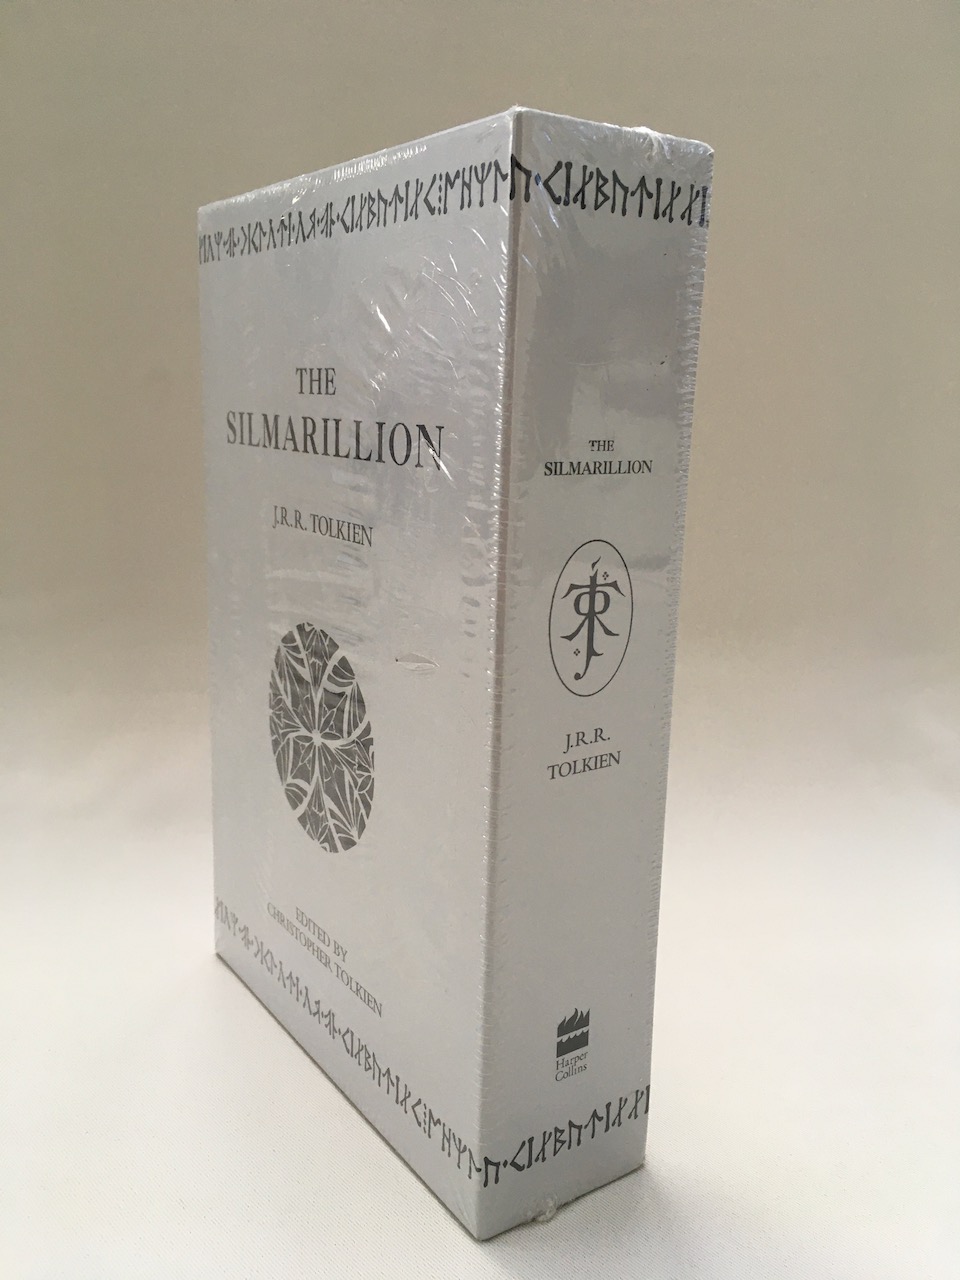 
The Silmarillion Limited Collector's Box 3